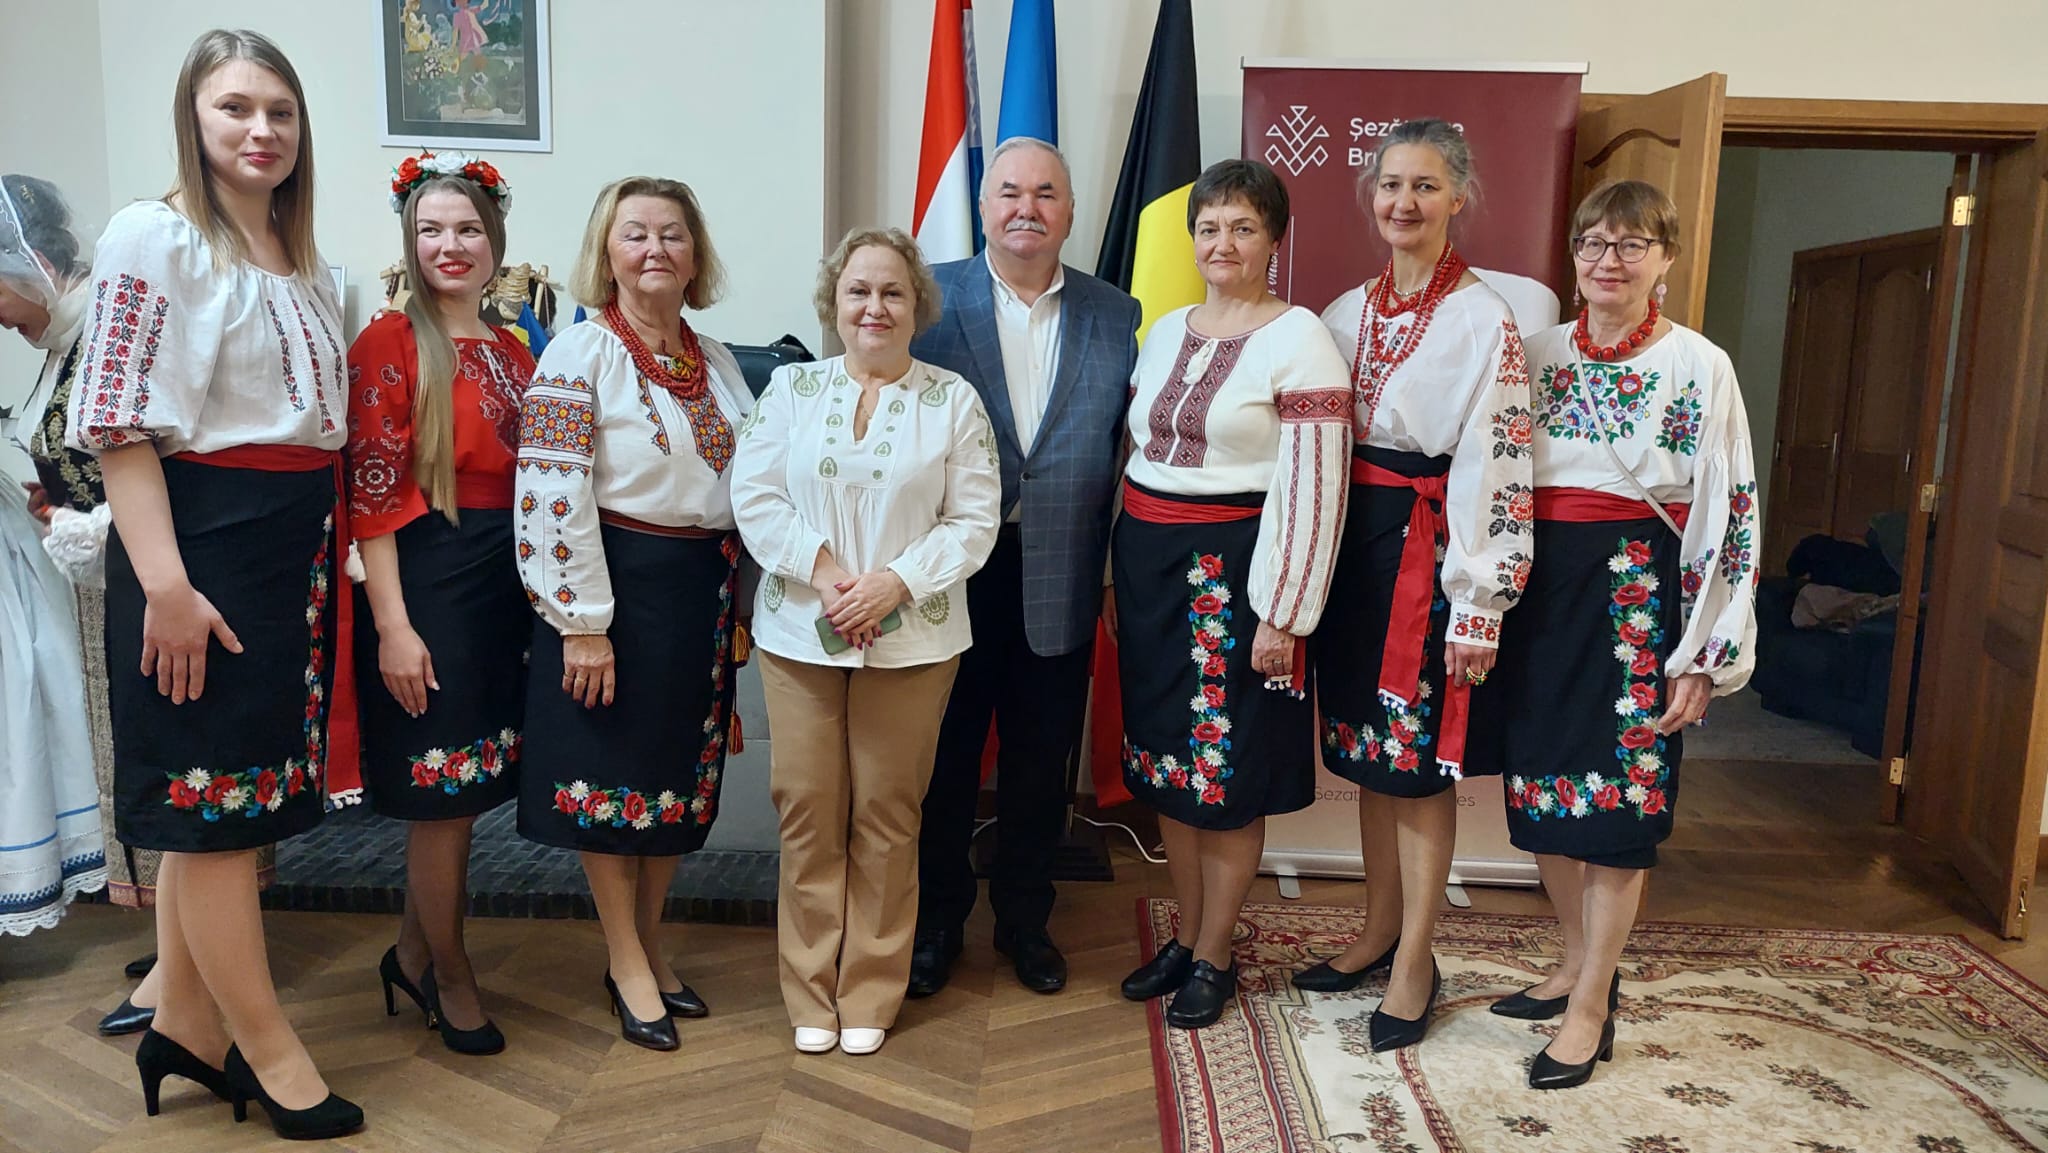 On November 26, our Promote Ukraine choir performed at an incredible event in honor of the 4th anniversary of Sezatoare Bruxelles